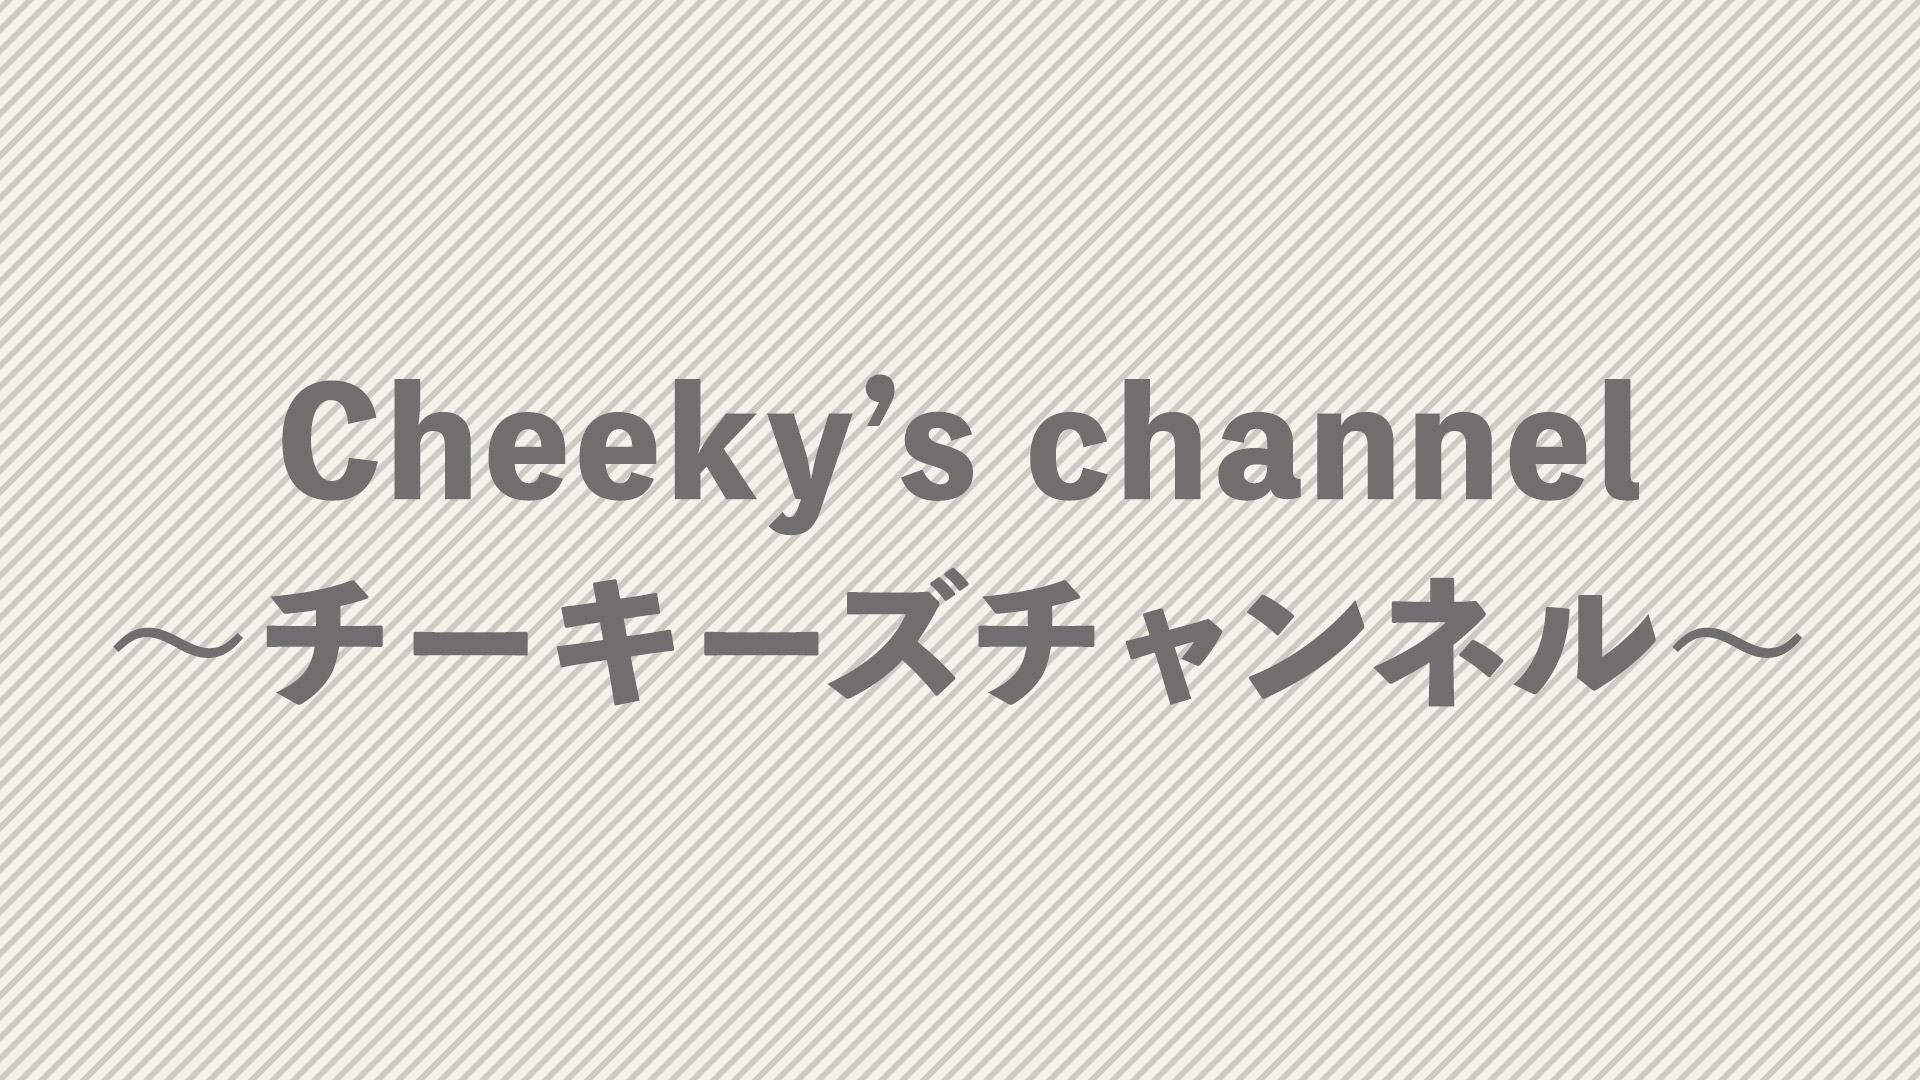 Cheeky’s channel〜チーキーズチャンネル〜